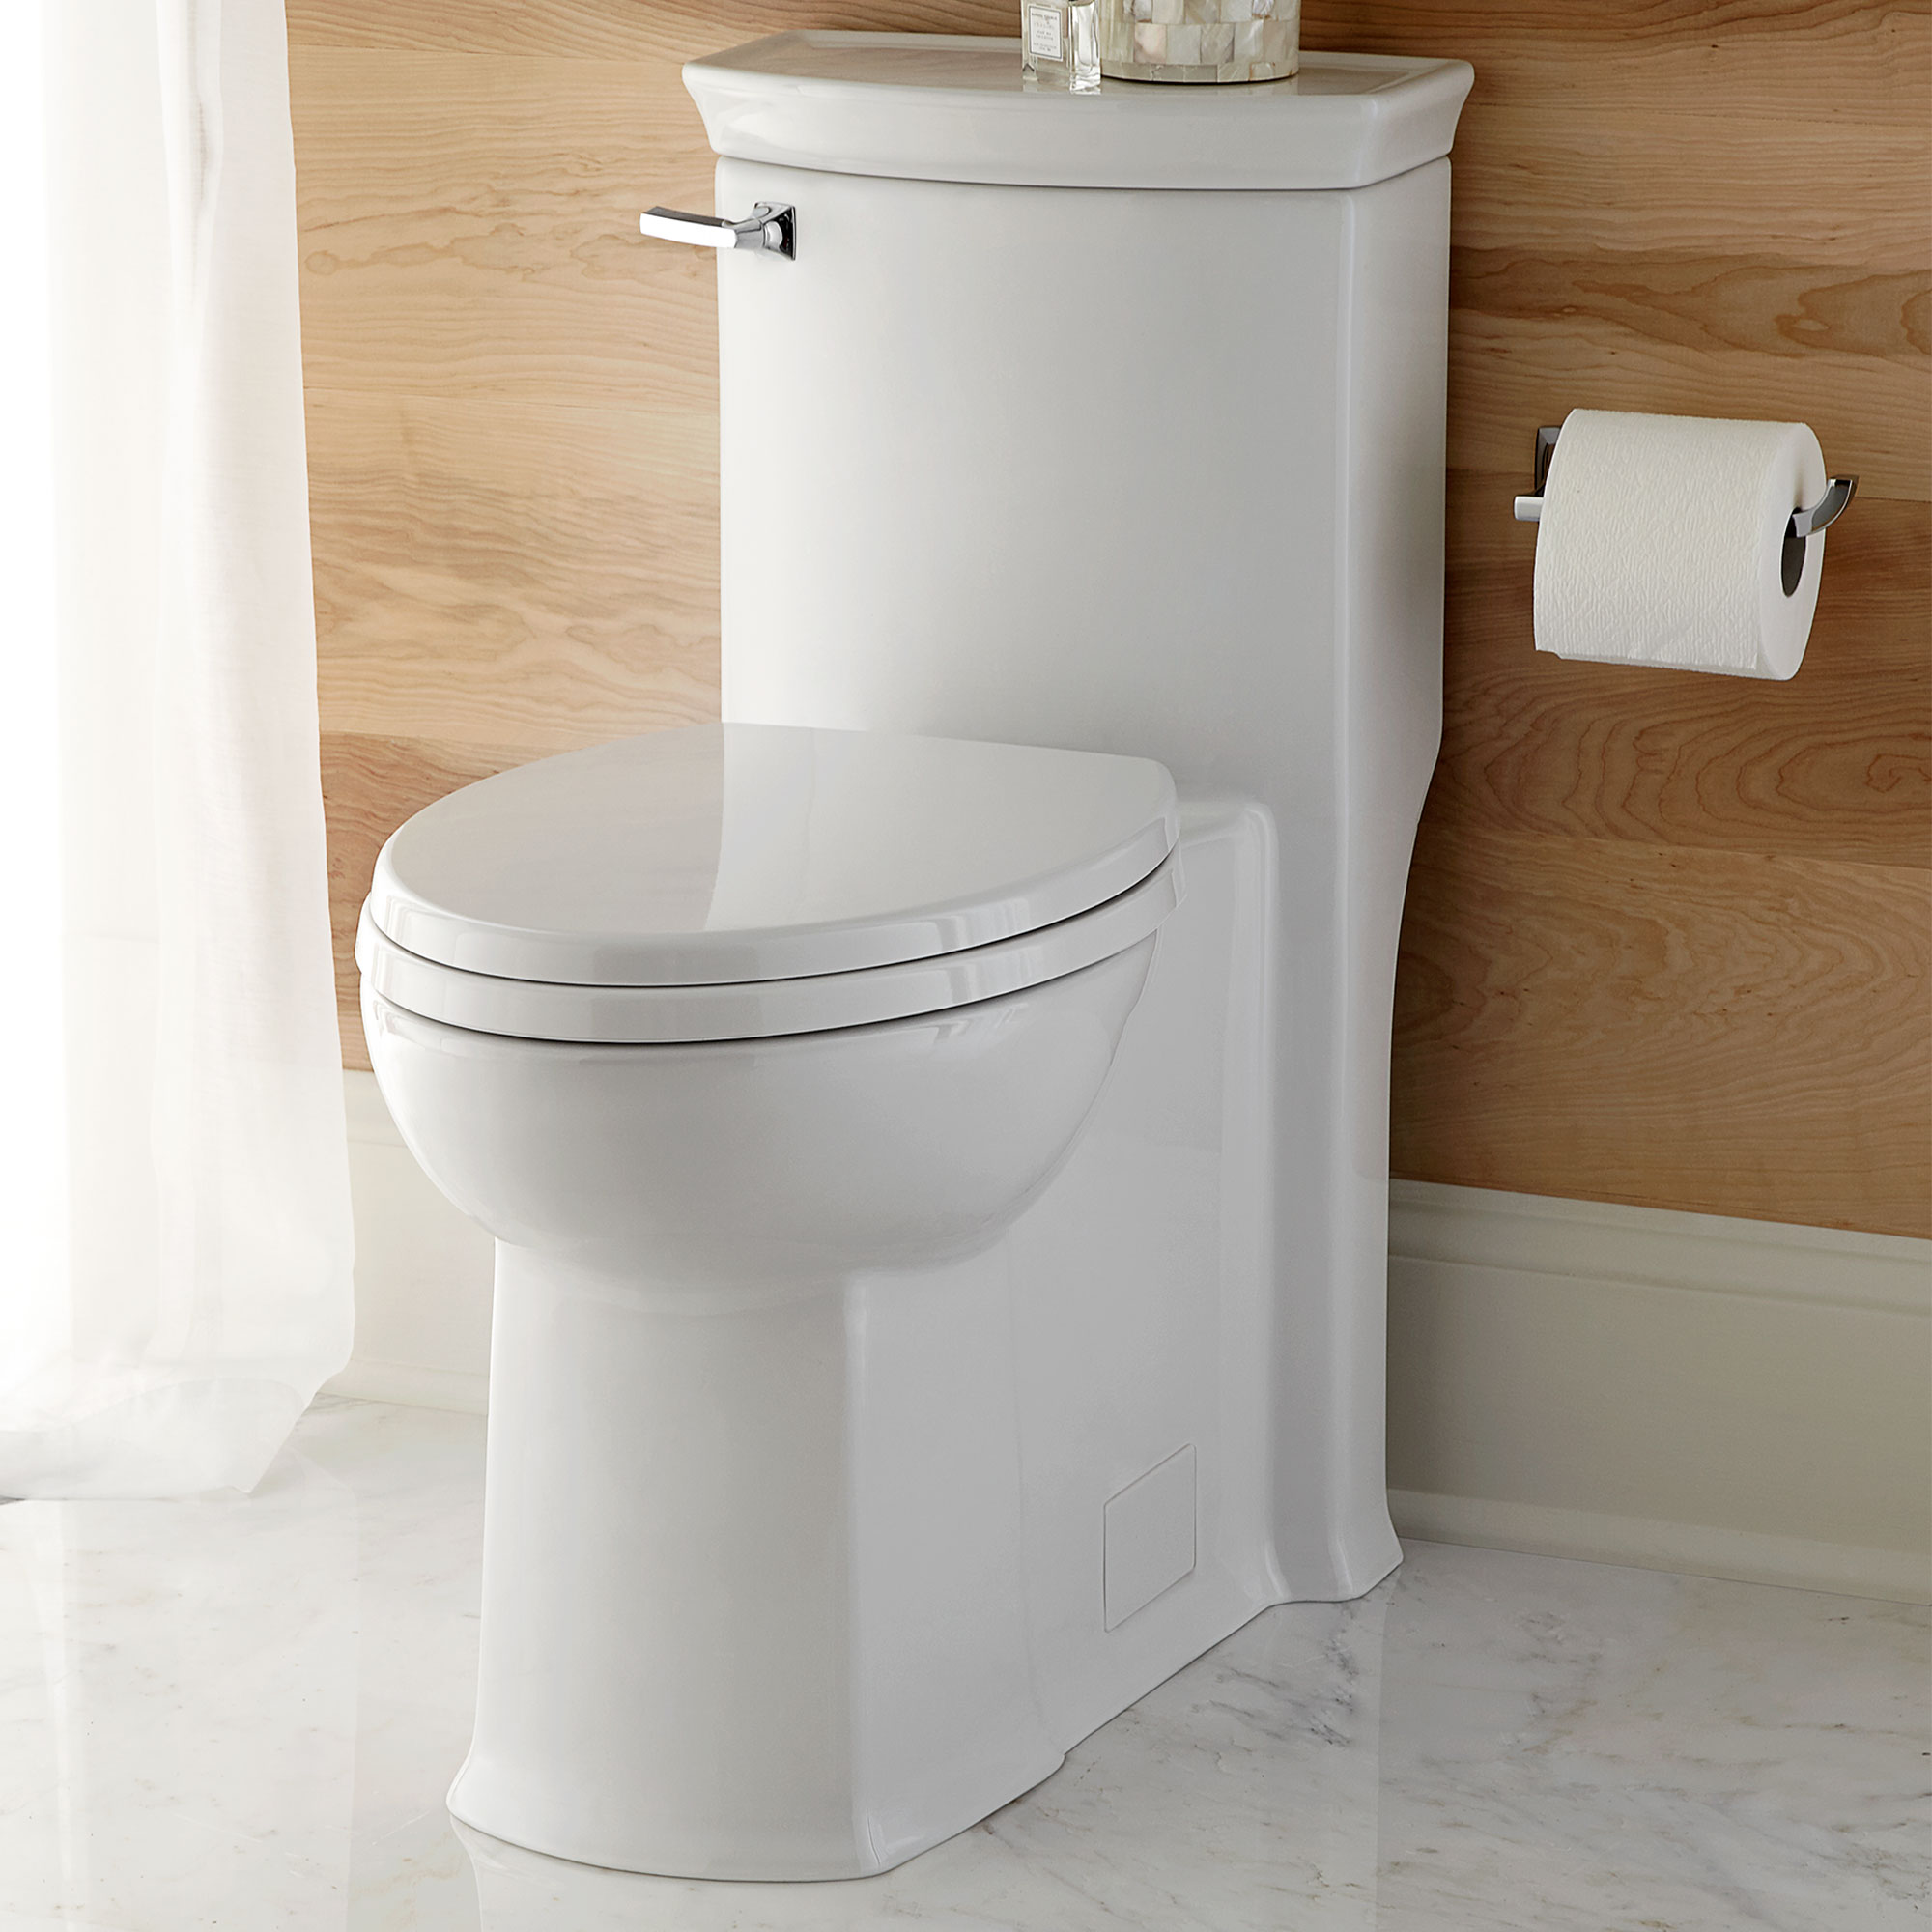 Wyatt® One-Piece Chair Height Left-Hand Trip Lever Elongated Toilet with Seat